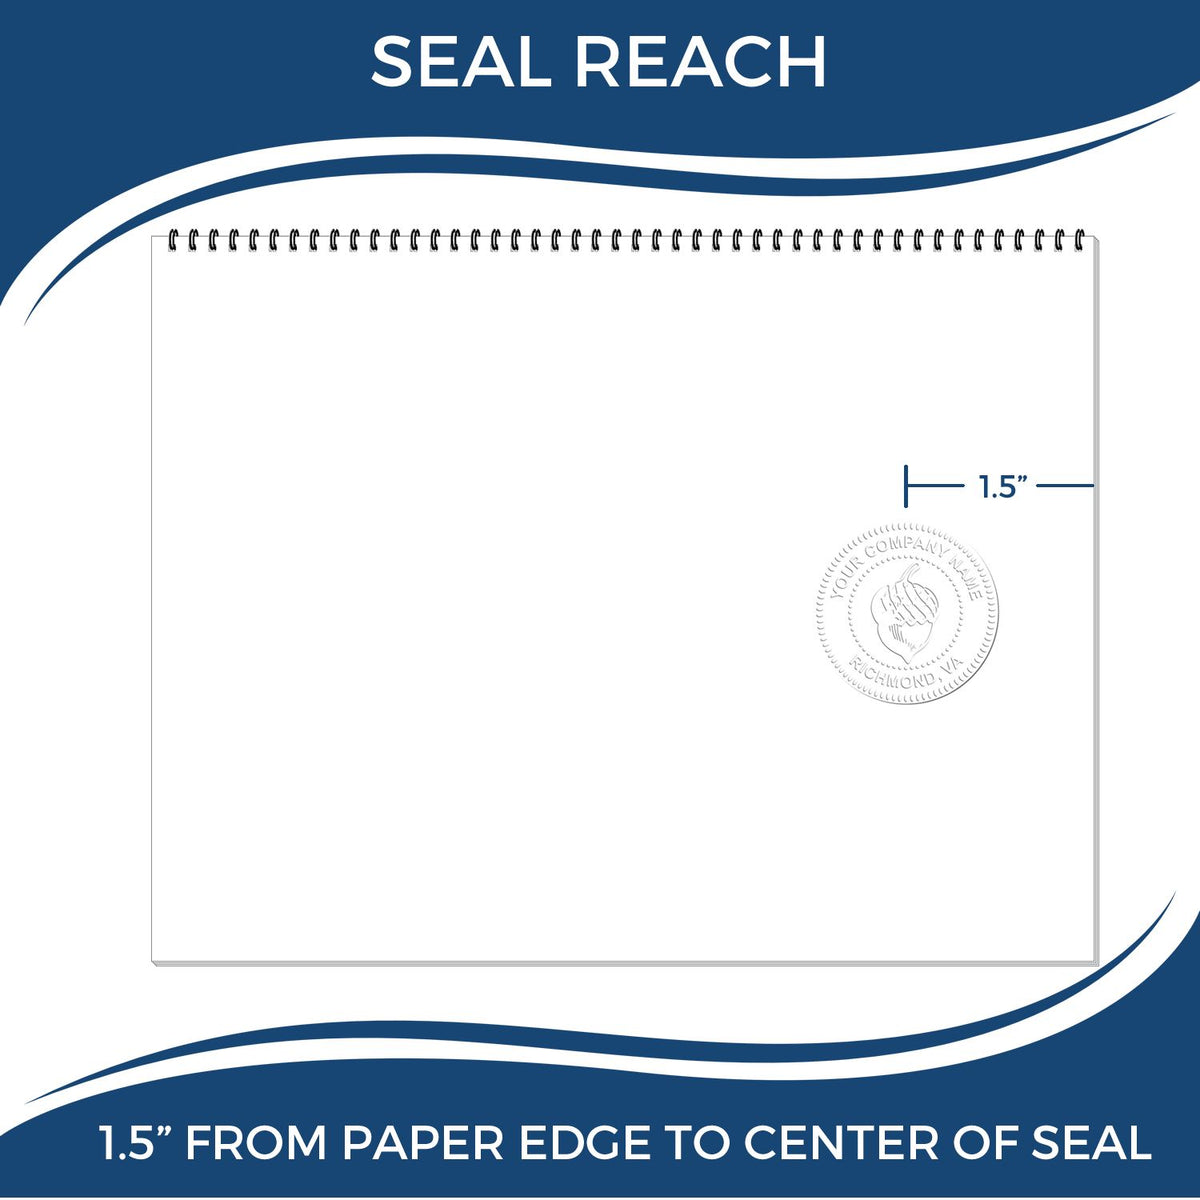 An infographic showing the seal reach which is represented by a ruler and a miniature seal image of the Handheld Washington Professional Engineer Embosser